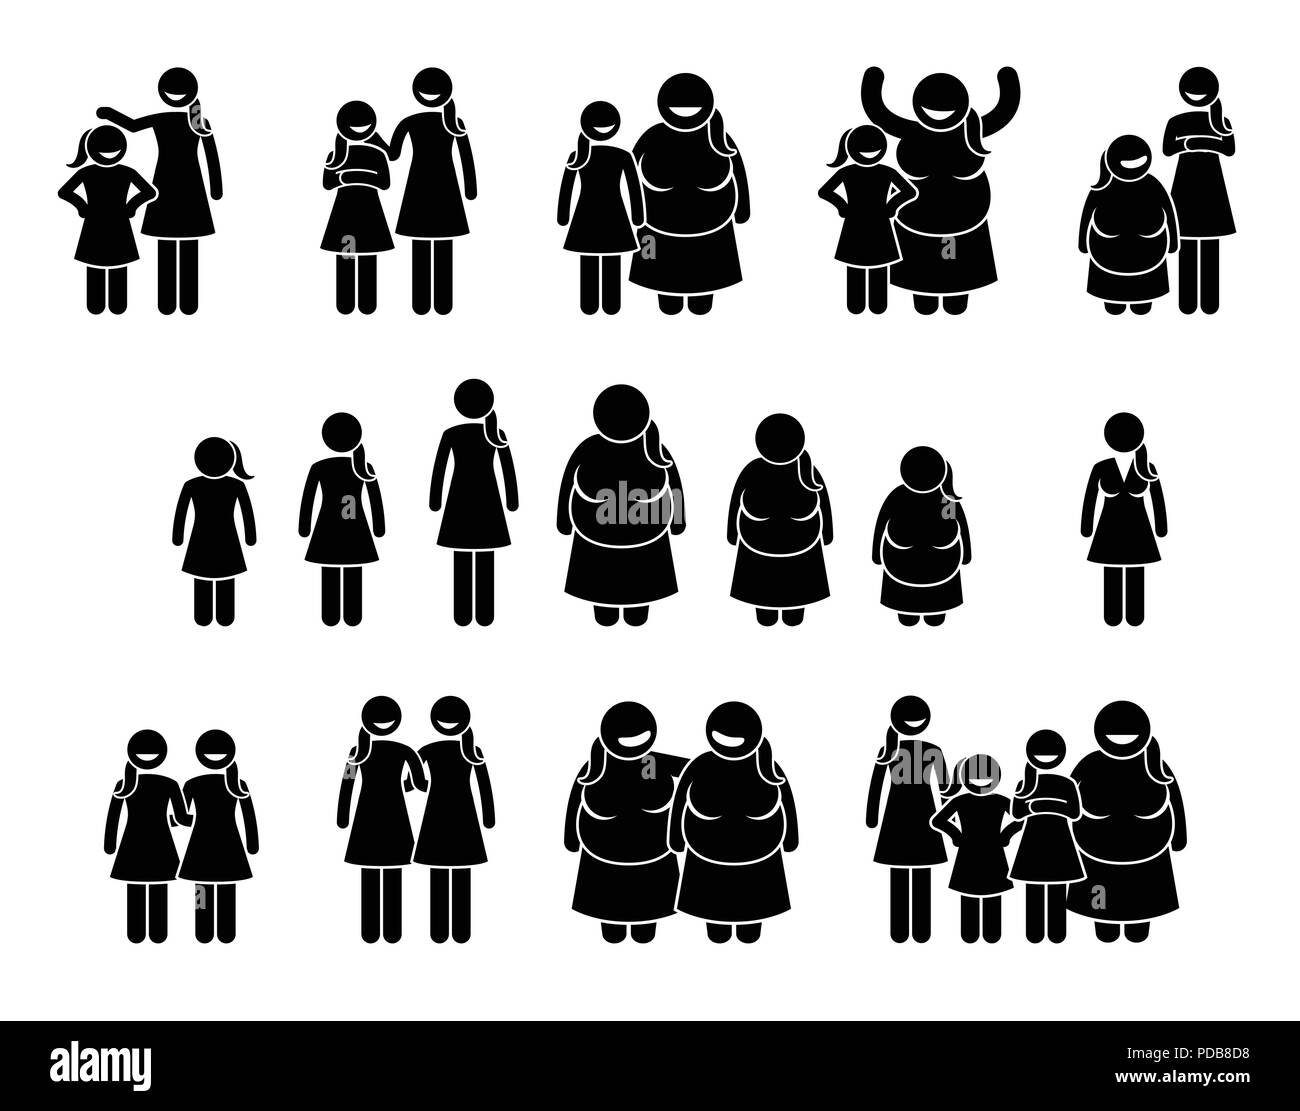 Woman and Girls of Different Body Sizes and Heights Icons. Stick figures pictogram depict average, tall, short, fat, and thin body figures of female. Stock Vector